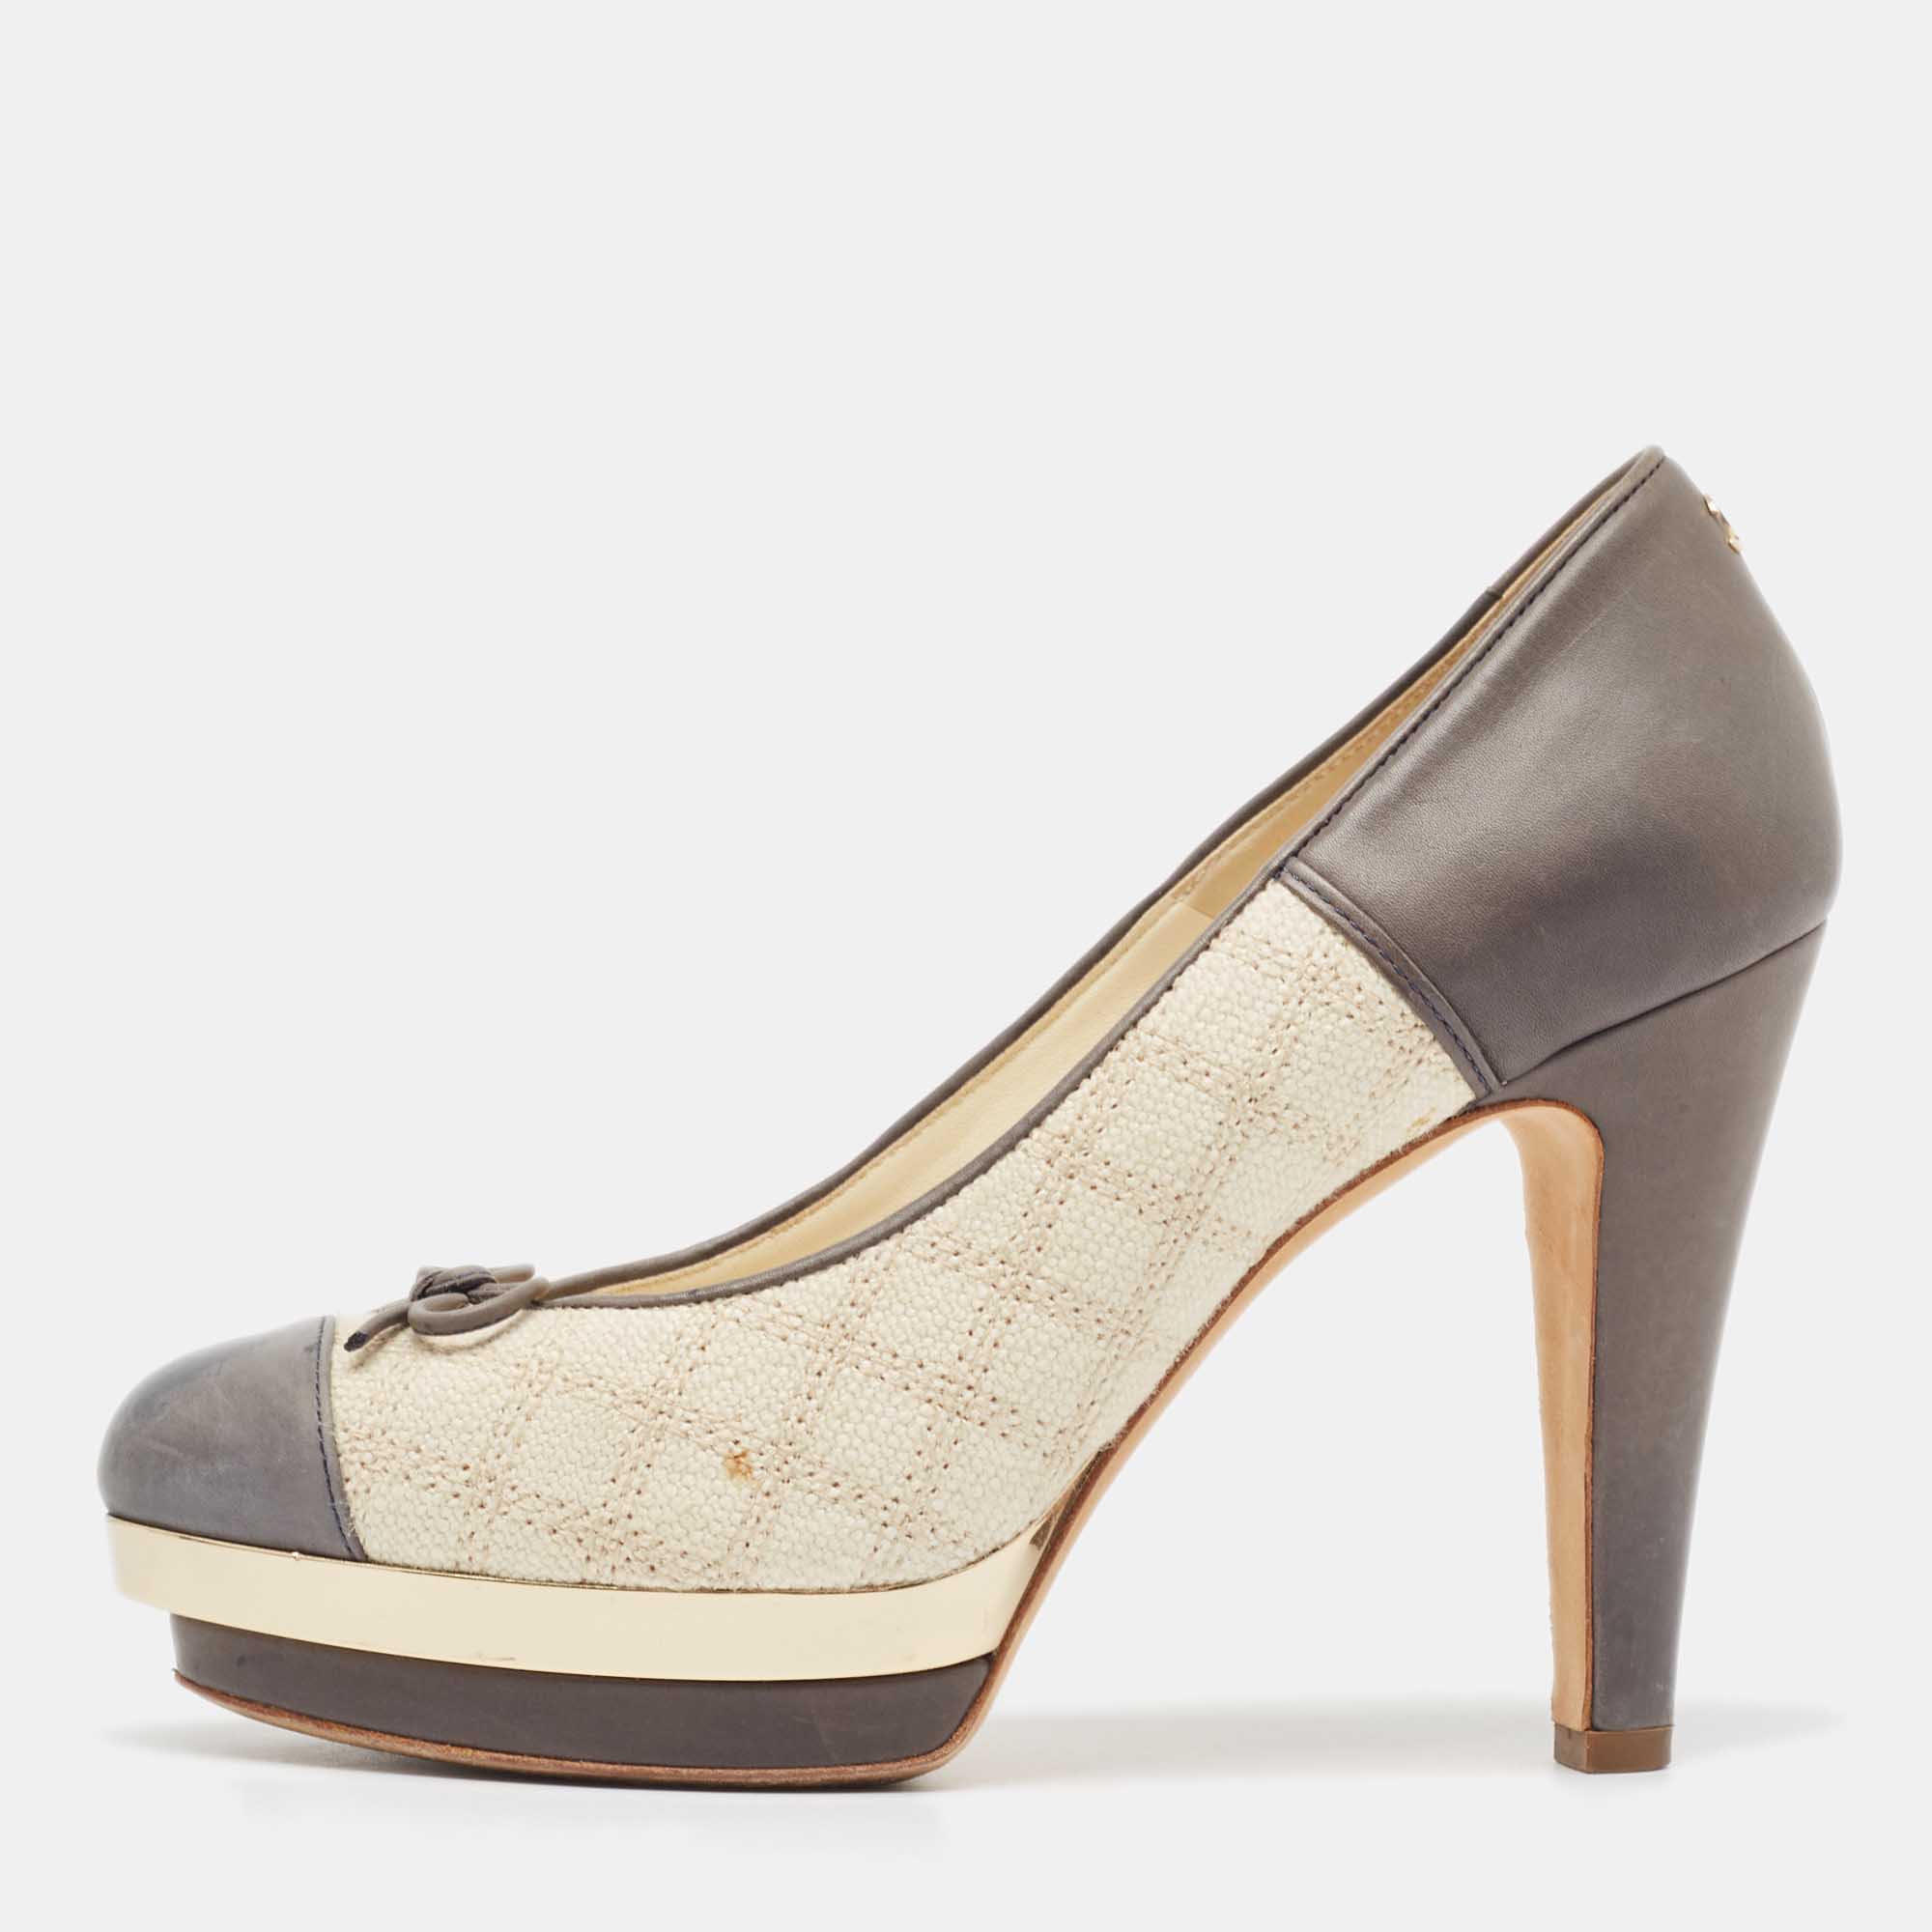 Chanel grey/cream leather and canvas cc bow platform pumps size 36